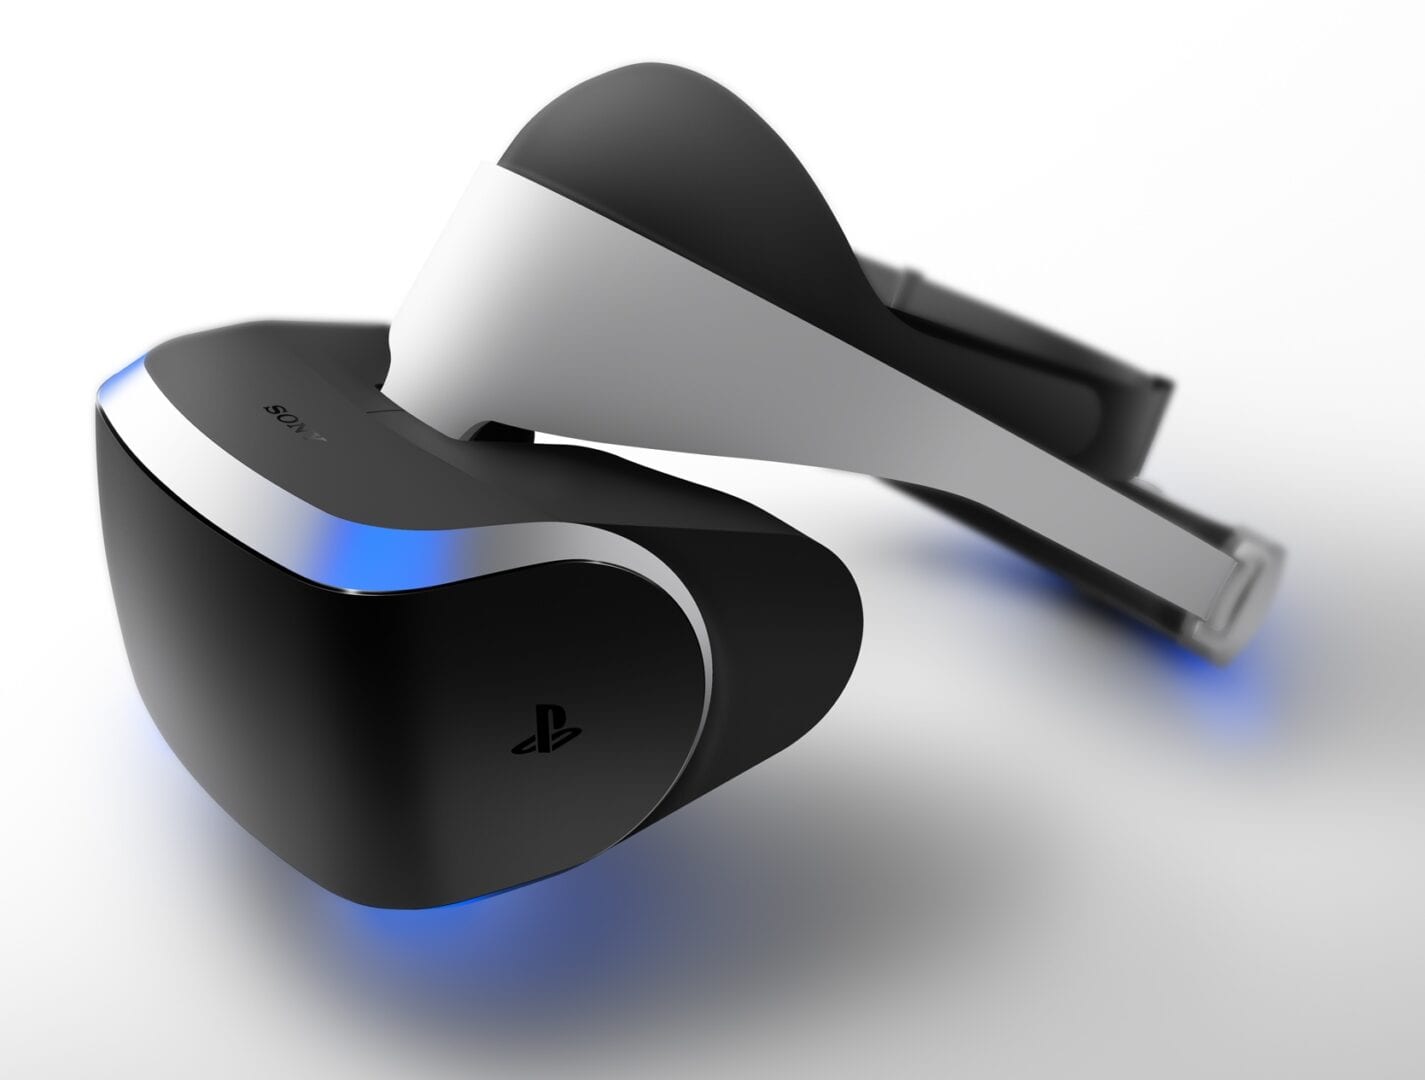 Ubisoft Montreal Creative Director Really Hates VR, Mocks Sony's "Mildly Ridiculous" Price for PSVR